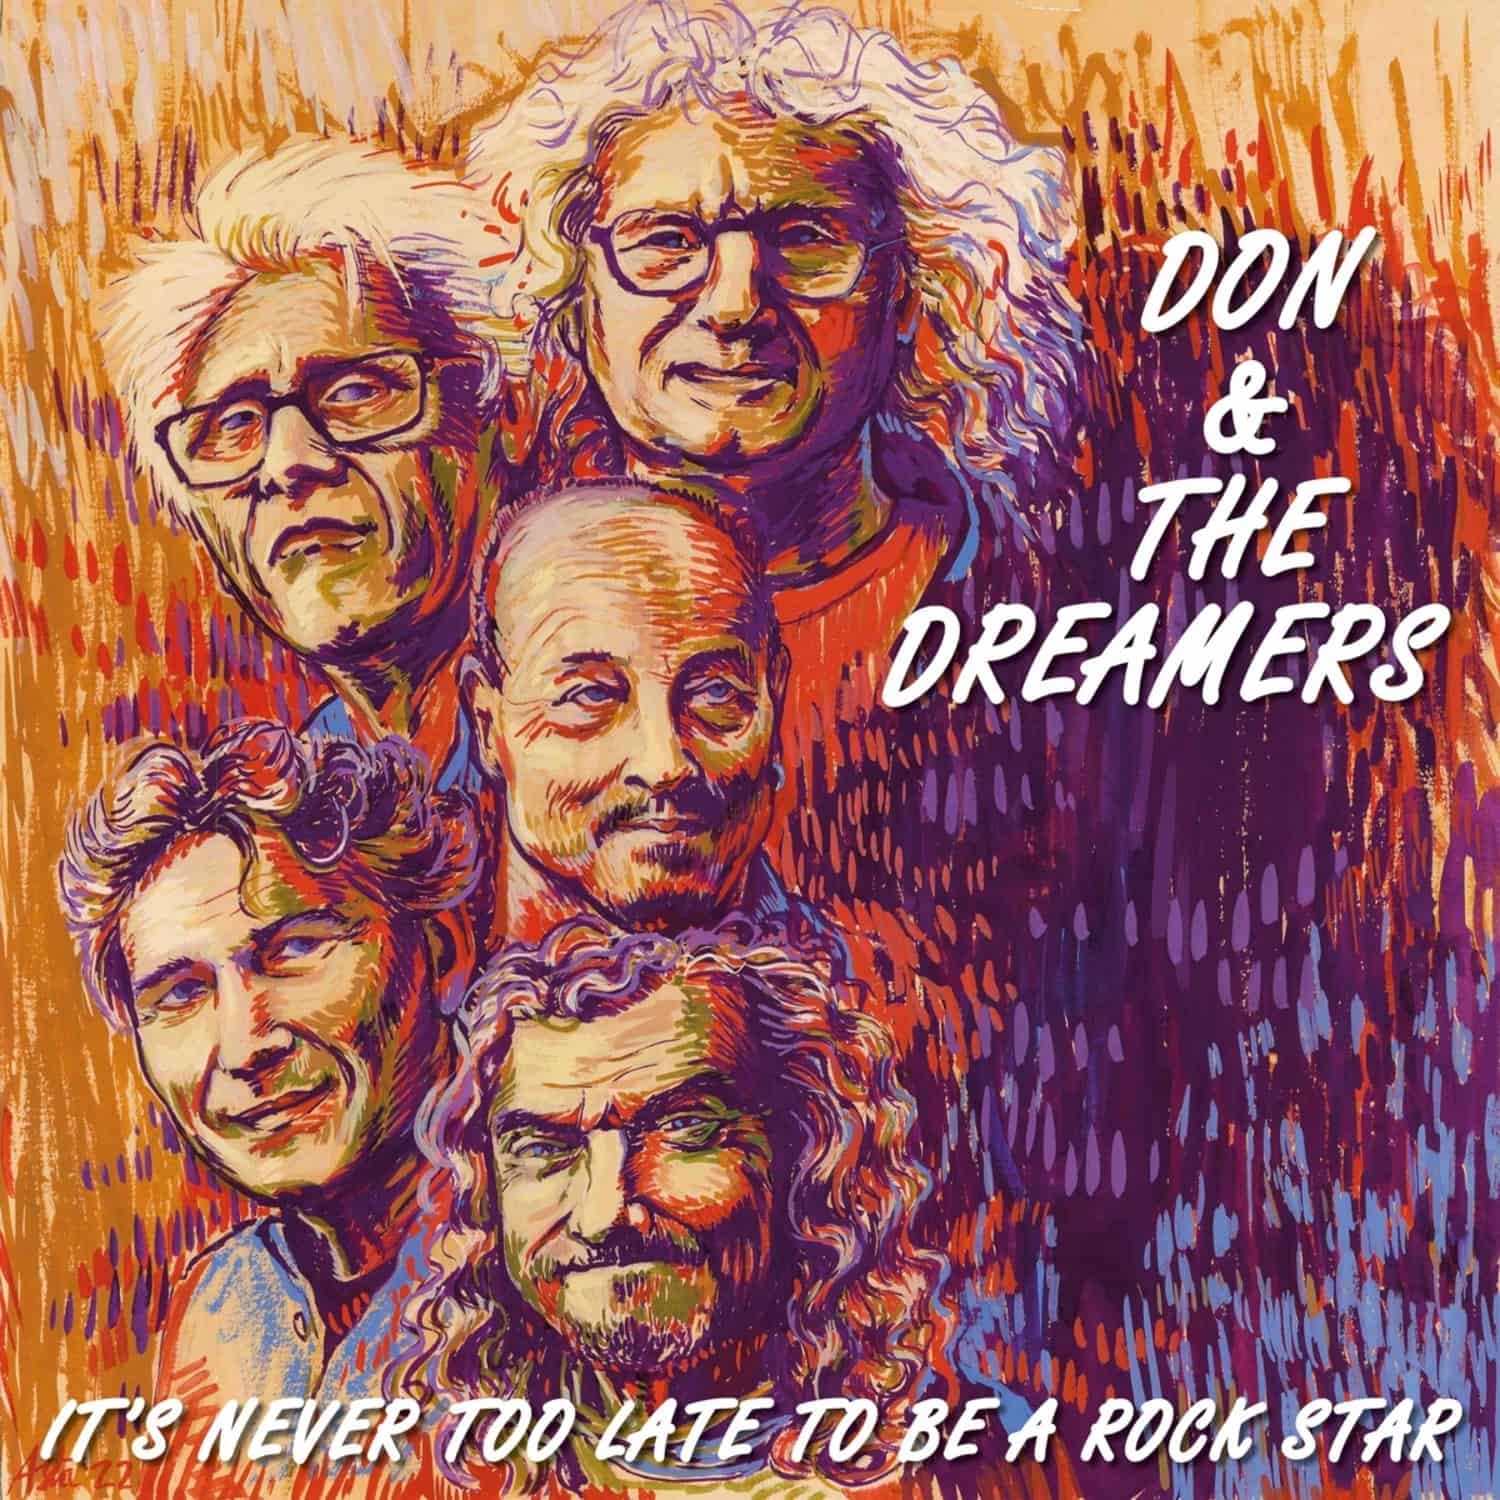 Don & The Dreamers - IT S NEVER TOO LATE TO BE A ROCKSTAR 